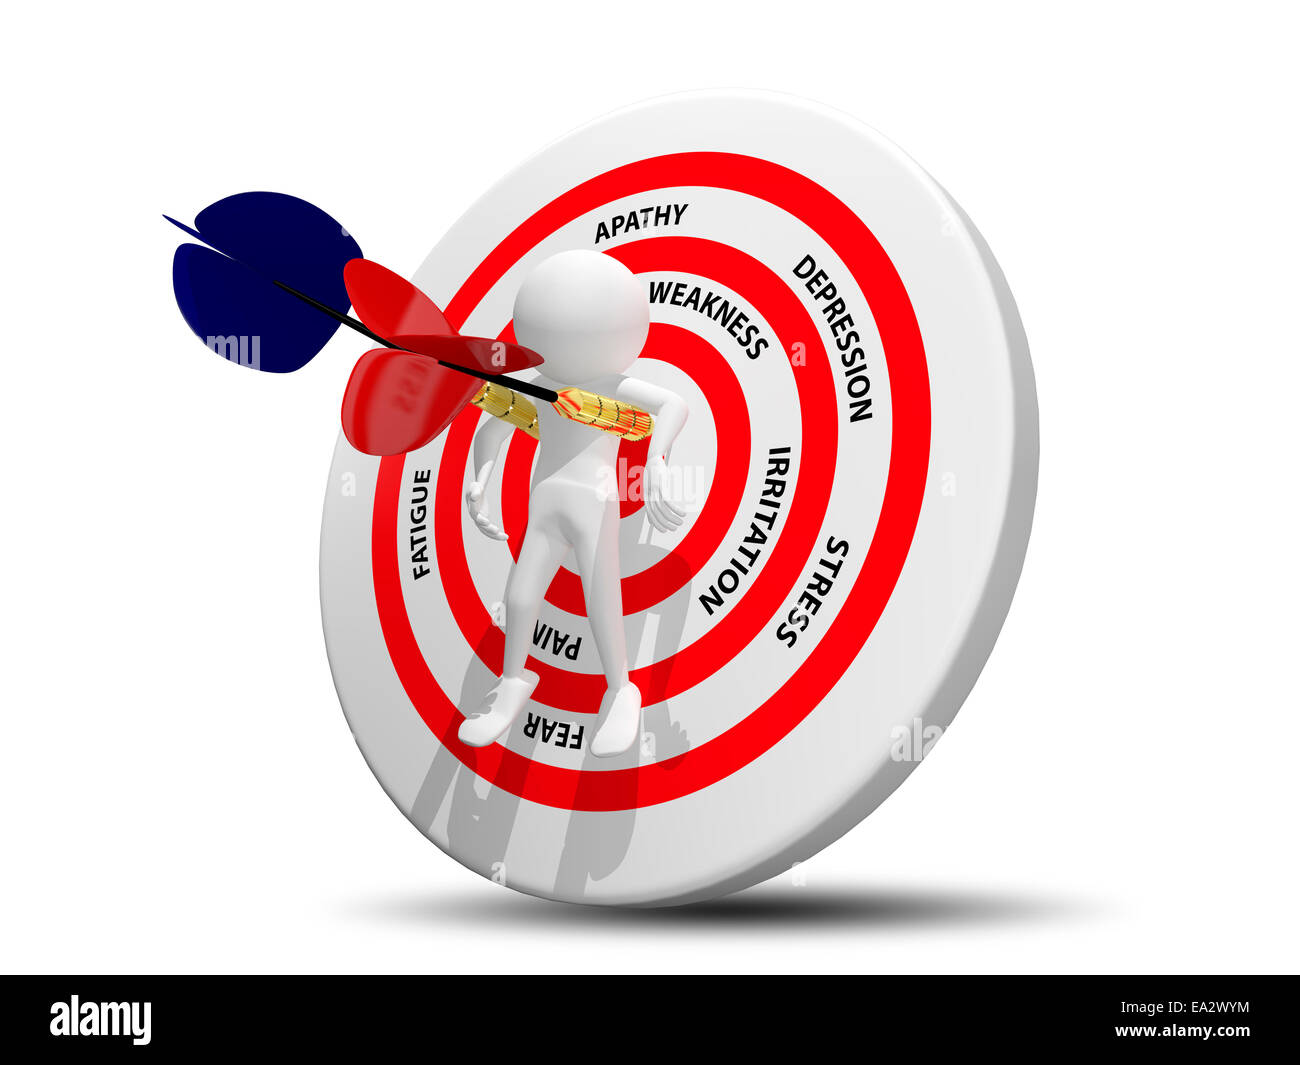 abstract illustration of a man on target Stock Photo